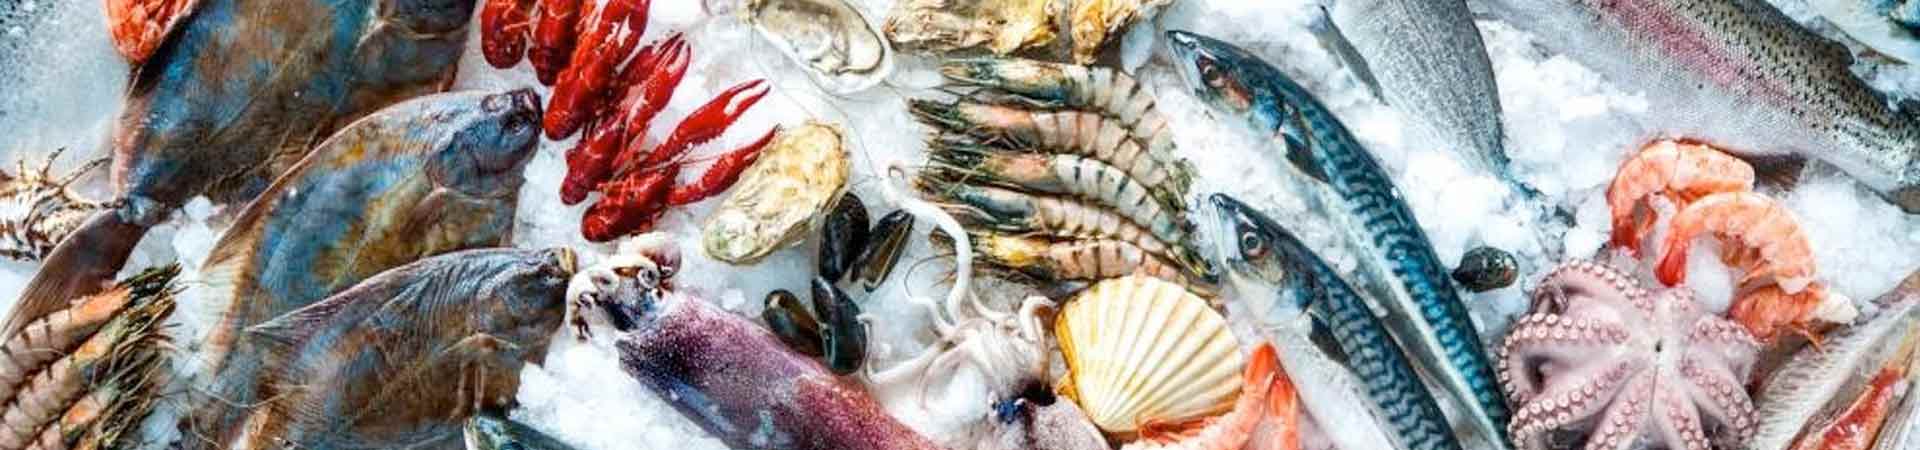 A selection of fresh seafood including fish, crustaceans and molluscs on a sales counter